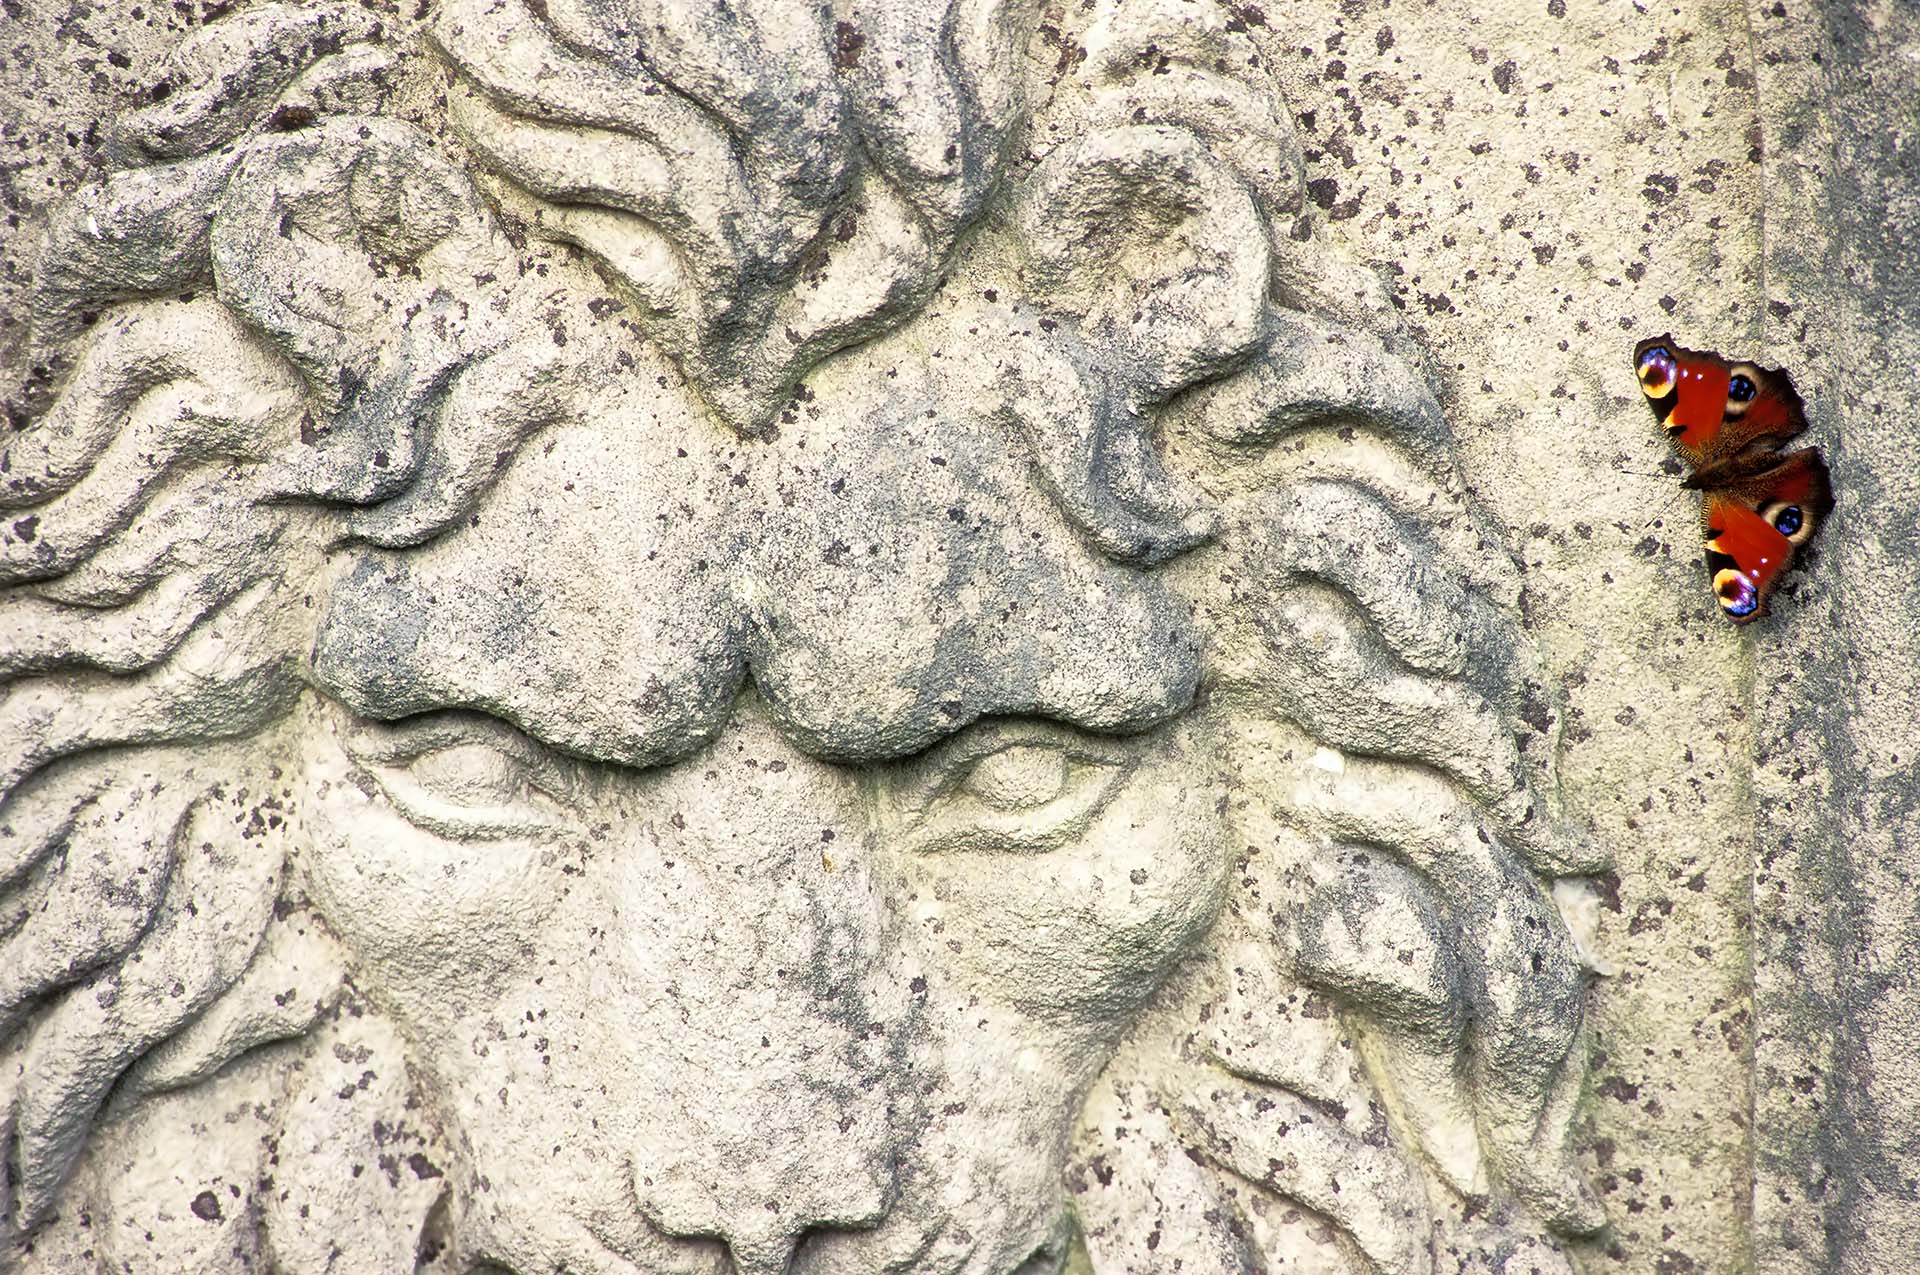 Lion sculpture on garden stone with butterfly